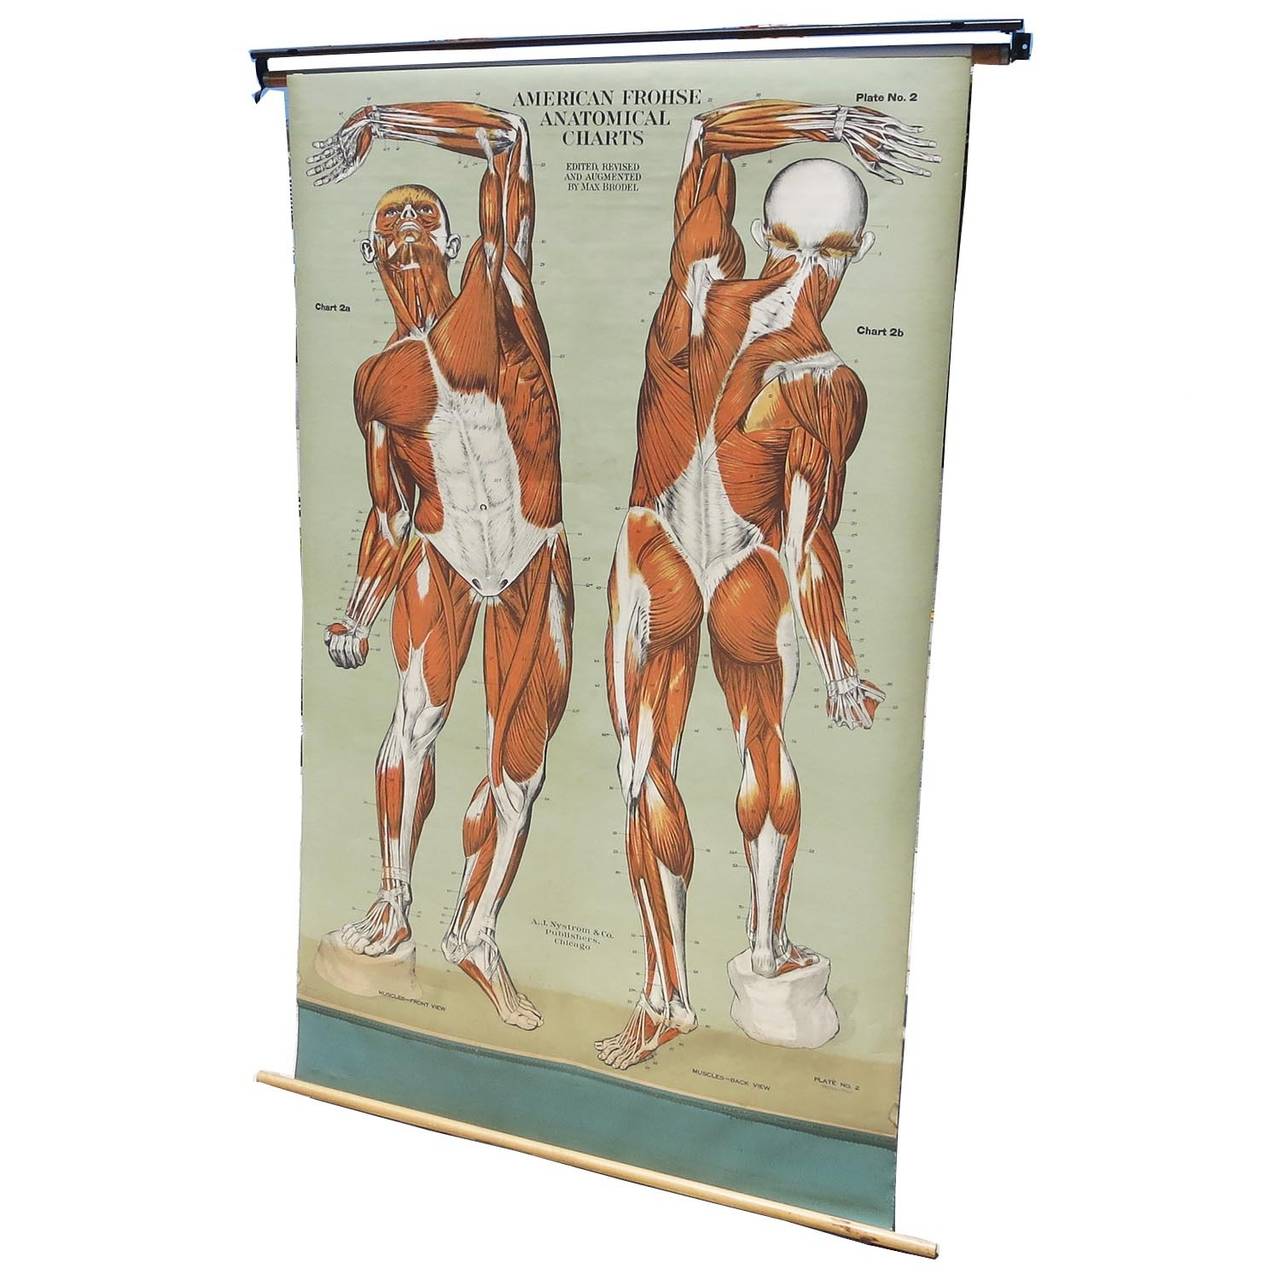 Vintage anatomical chart of the human muscular structure. It is on it's original roll up, wooden dowels. Detailed and beautiful graphics.